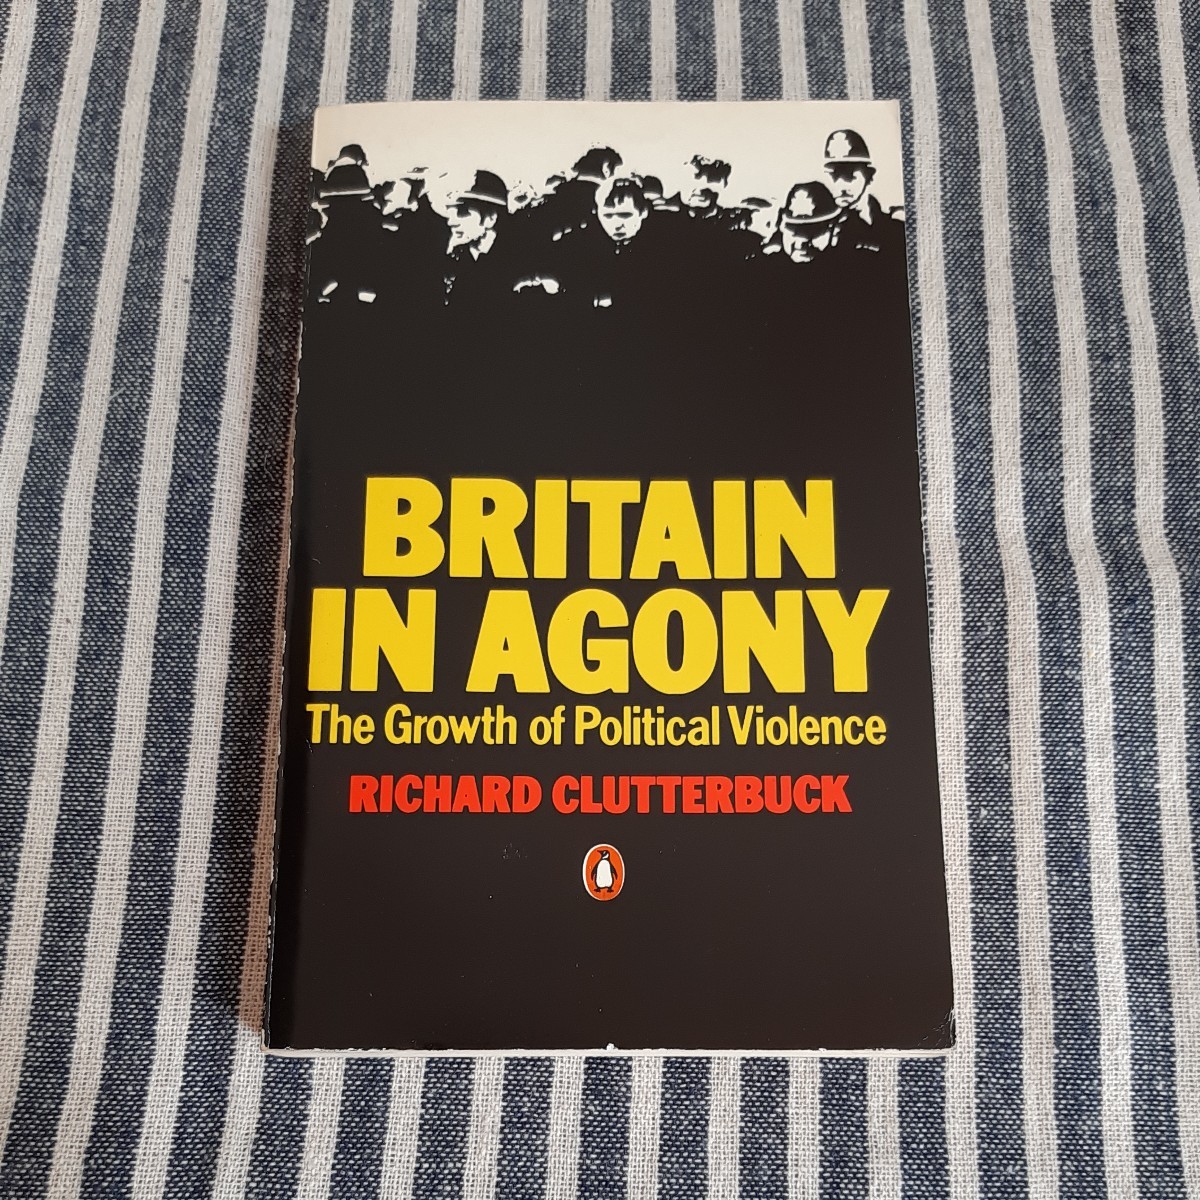 D8☆洋書☆RICHARD CLUTTERBUCK☆BRITAIN IN AGONY☆_画像1